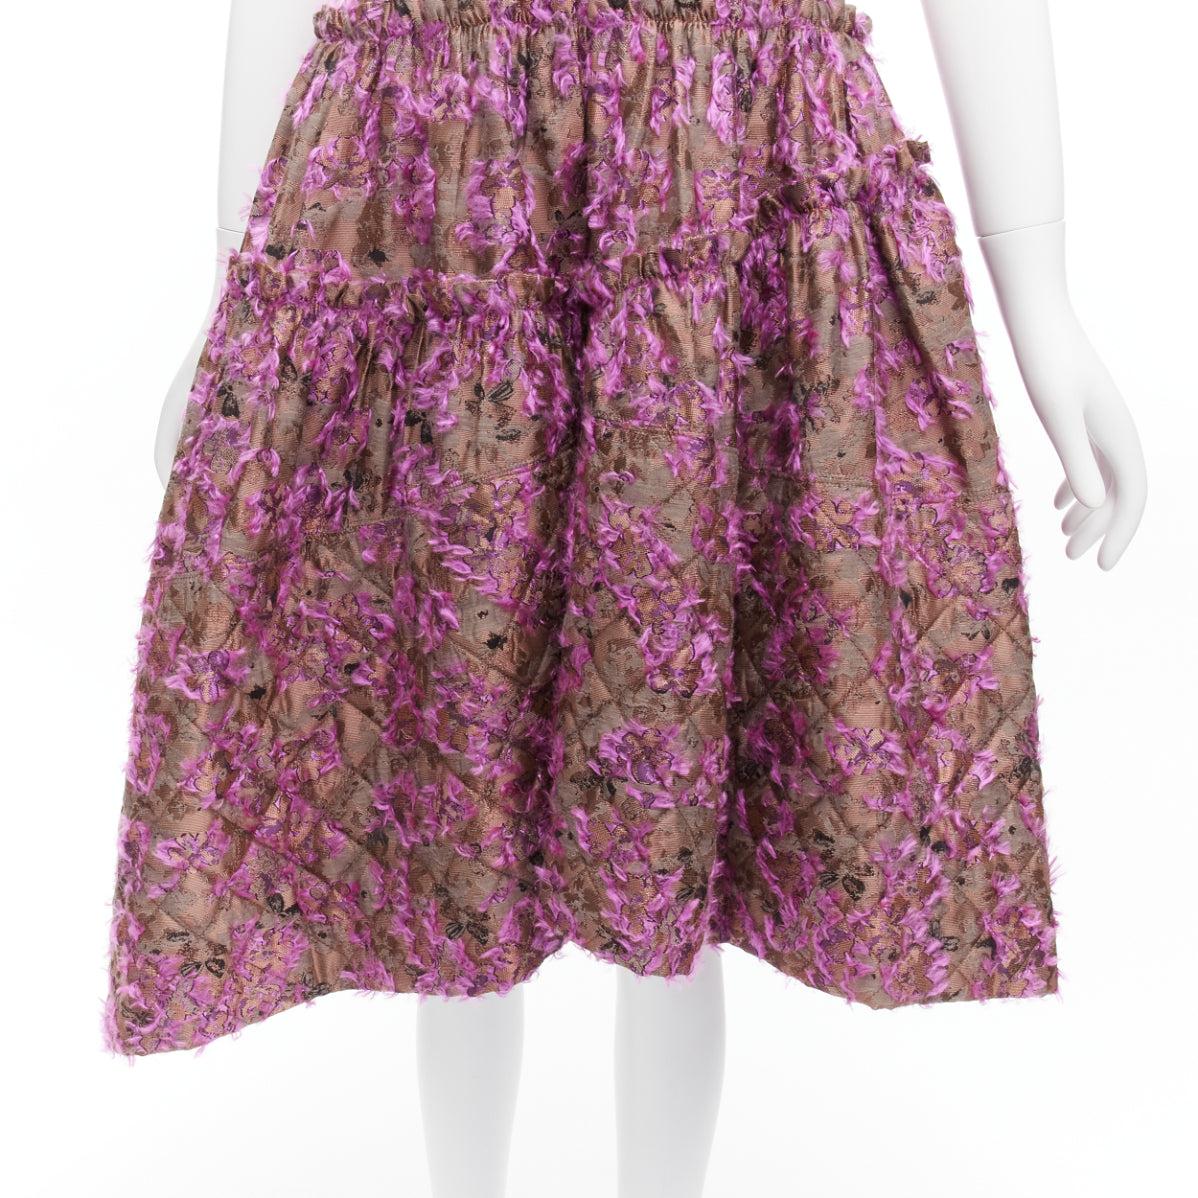 ANAIS JOURDEN pink brown floral cloque jacquard dropped waist flared dress FR38 M
Reference: BSHW/A00010
Brand: Anais Jourden
Material: Acetate, Blend
Color: Pink, Brown
Pattern: Floral
Closure: Zip
Lining: Black Fabric
Extra Details: Back zip.
Made